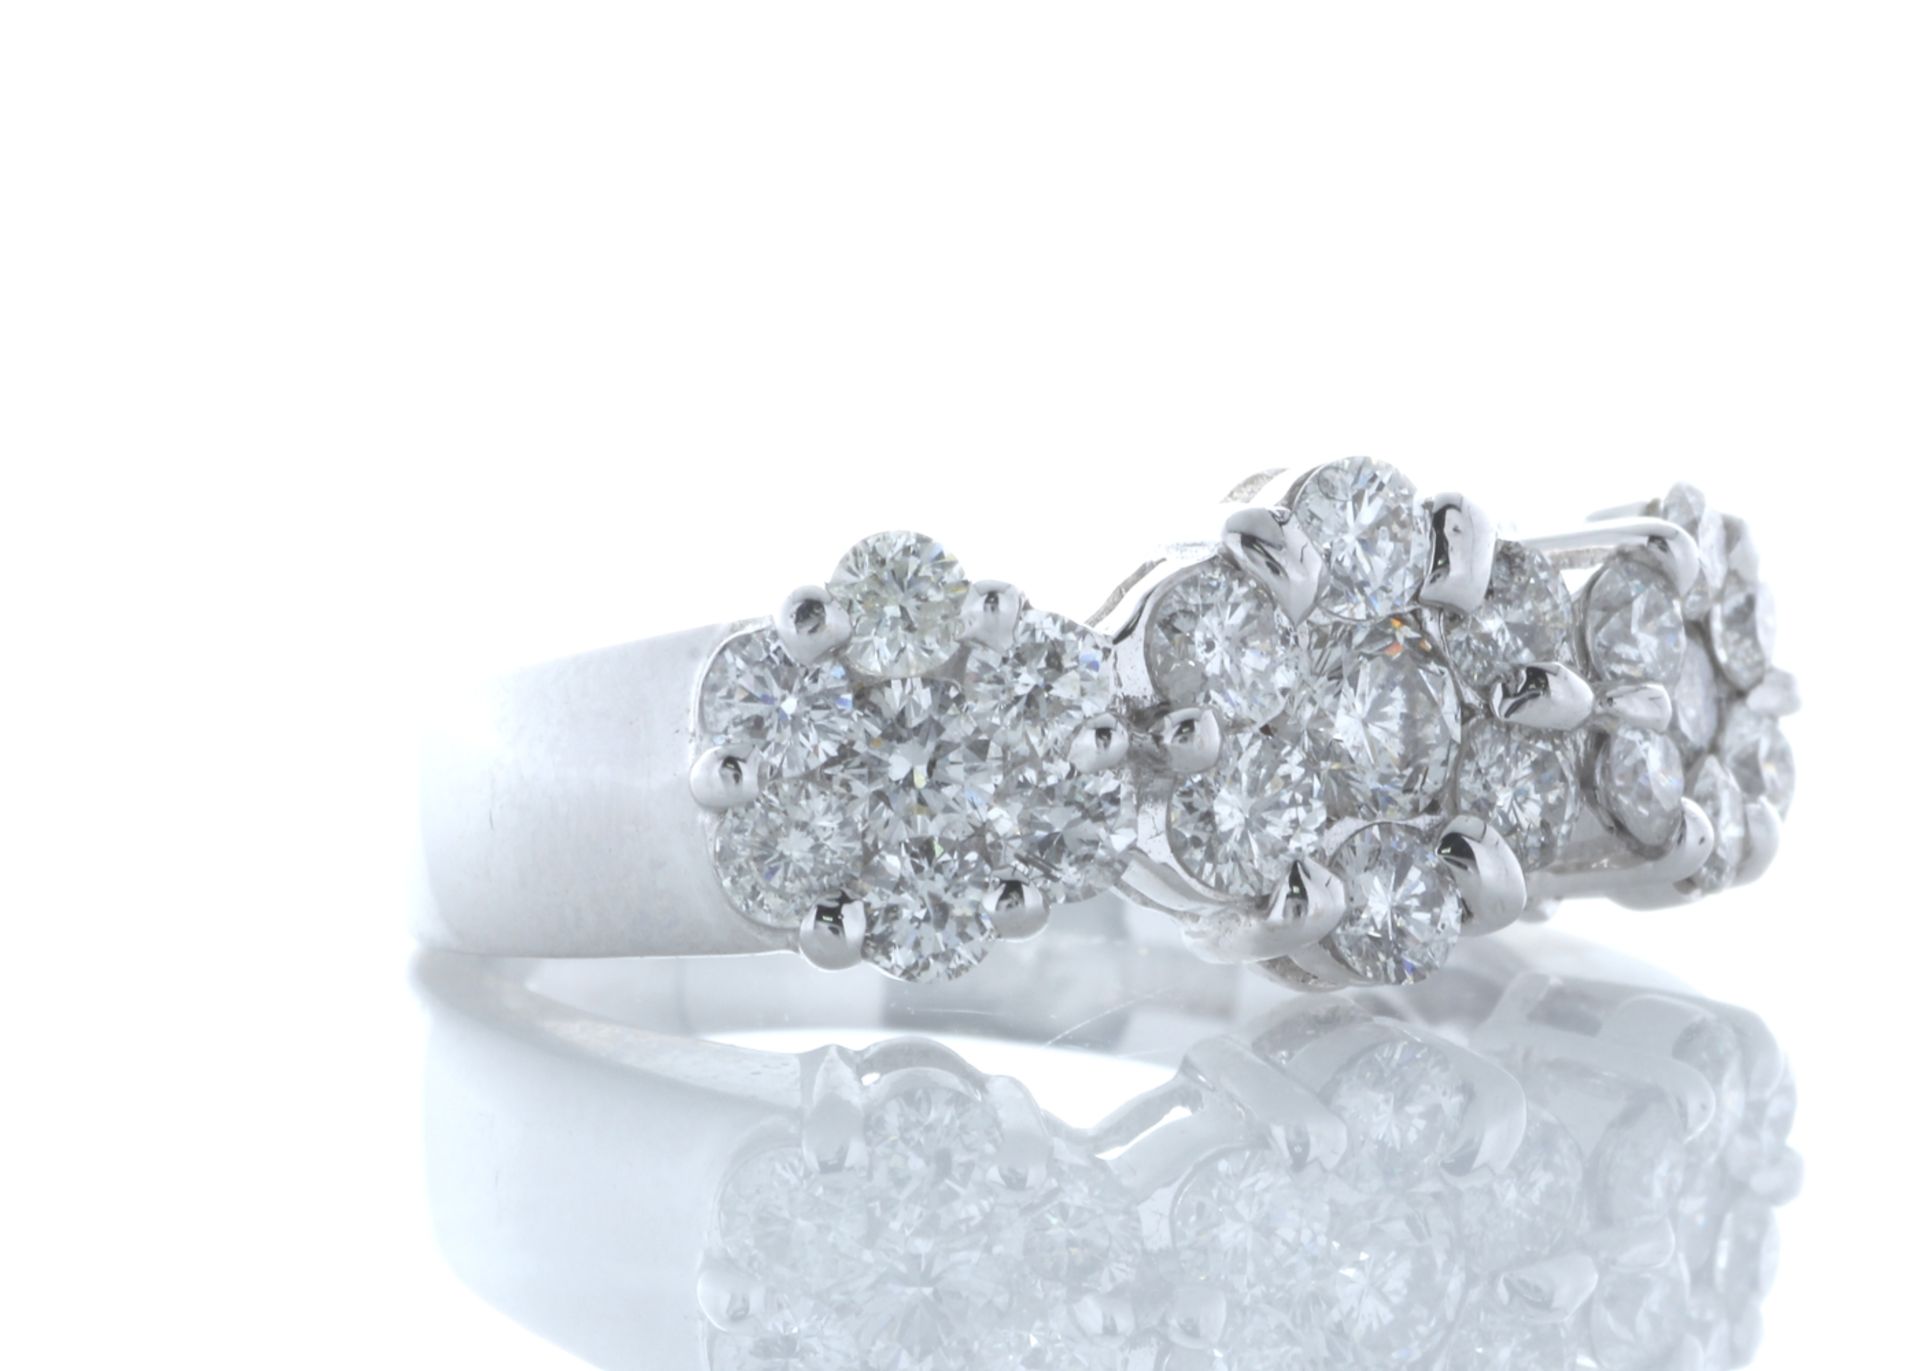 18ct White Gold Flower Cluster Diamond Ring 1.50 Carats - Valued by GIE £18,195.00 - Twenty one - Image 4 of 5